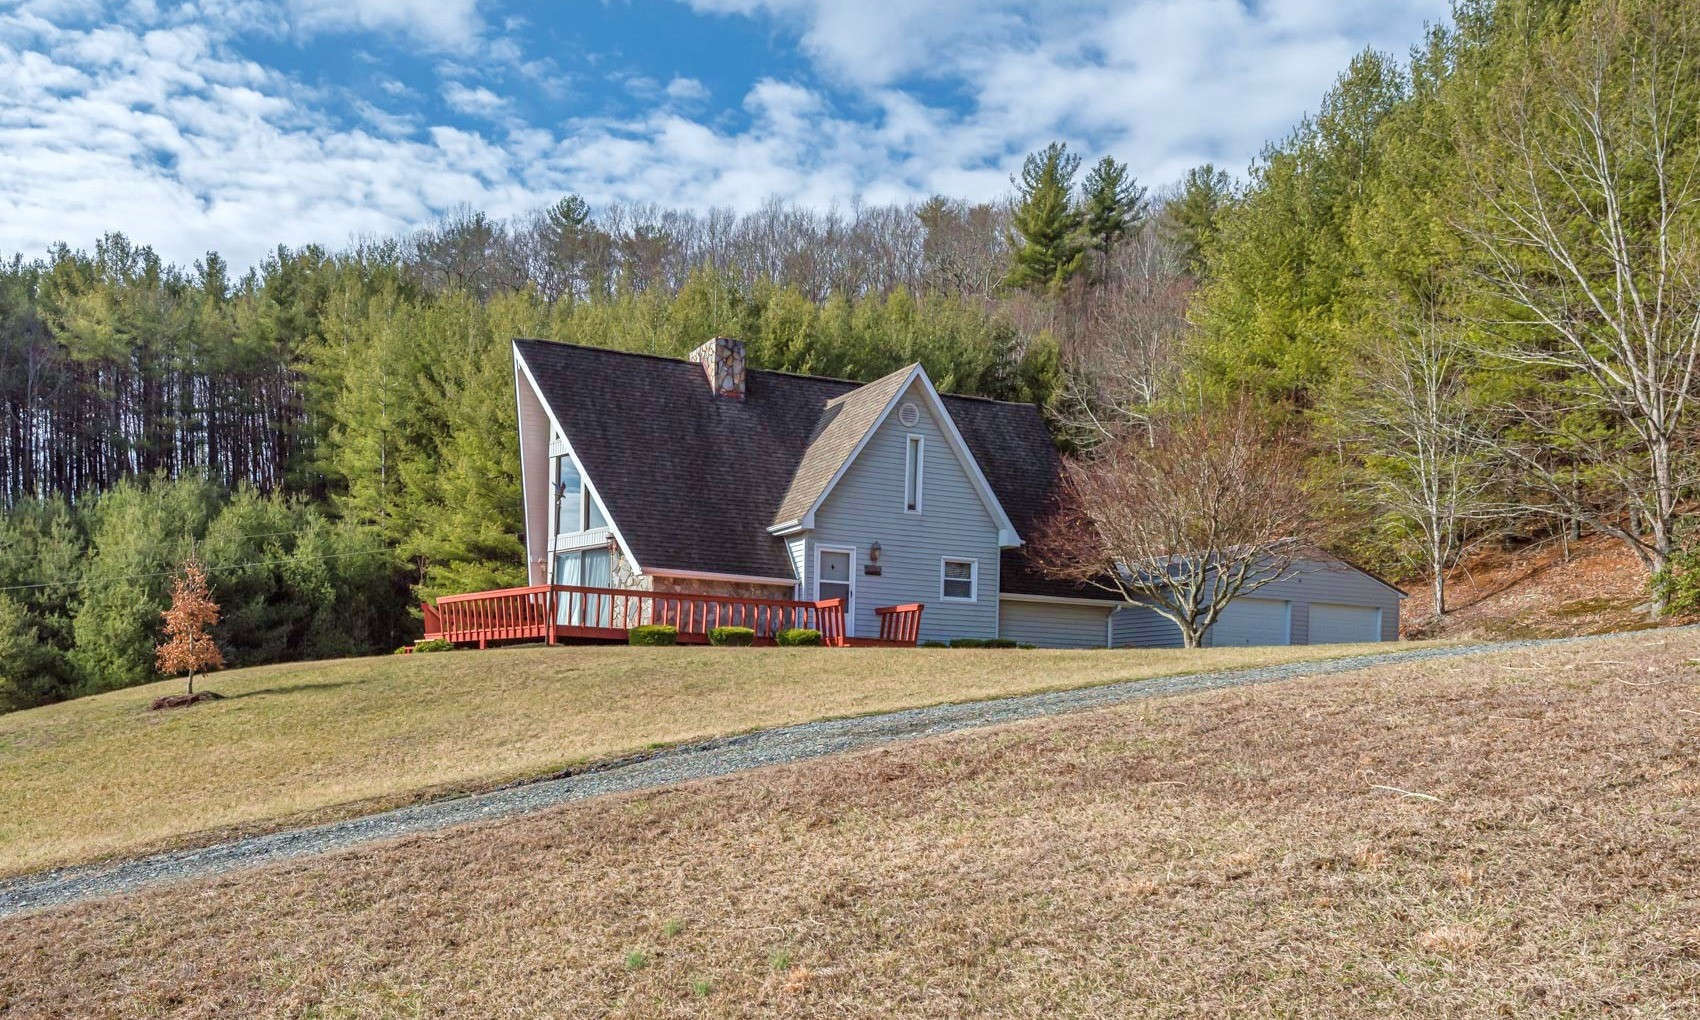 First time on the market! This spacious 3-bedroom, 2.5-bath mountain chalet is nestled among 5.54 acres in the Fleetwood area of Southern Ashe County, NC.